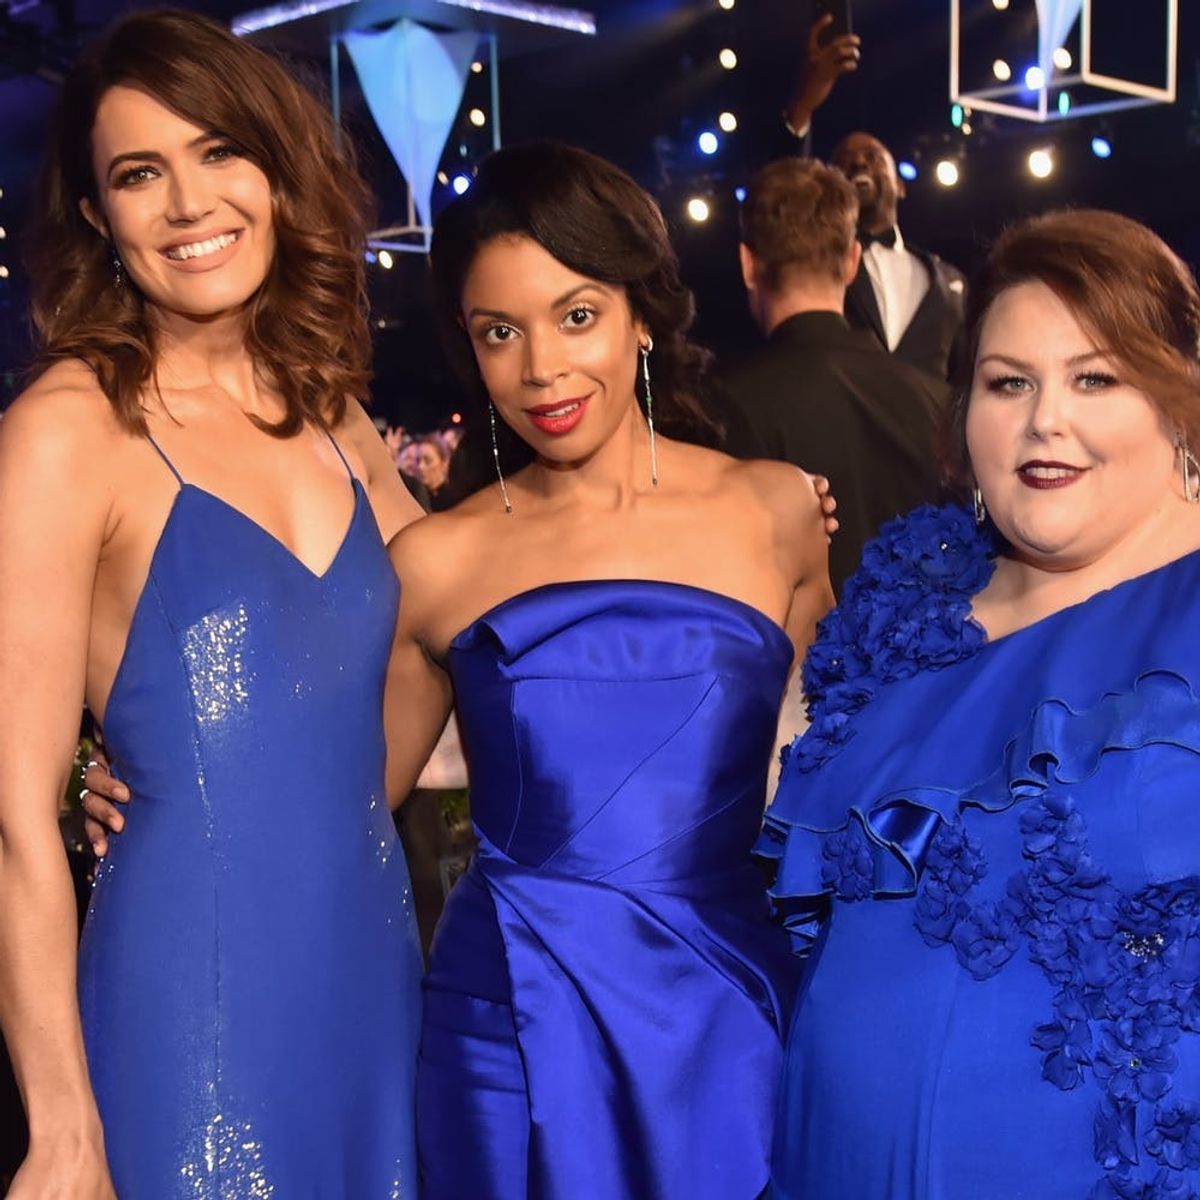 The Ladies of ‘This Is Us’ Were Triplets in Blue on the 2018 SAG Awards Carpet